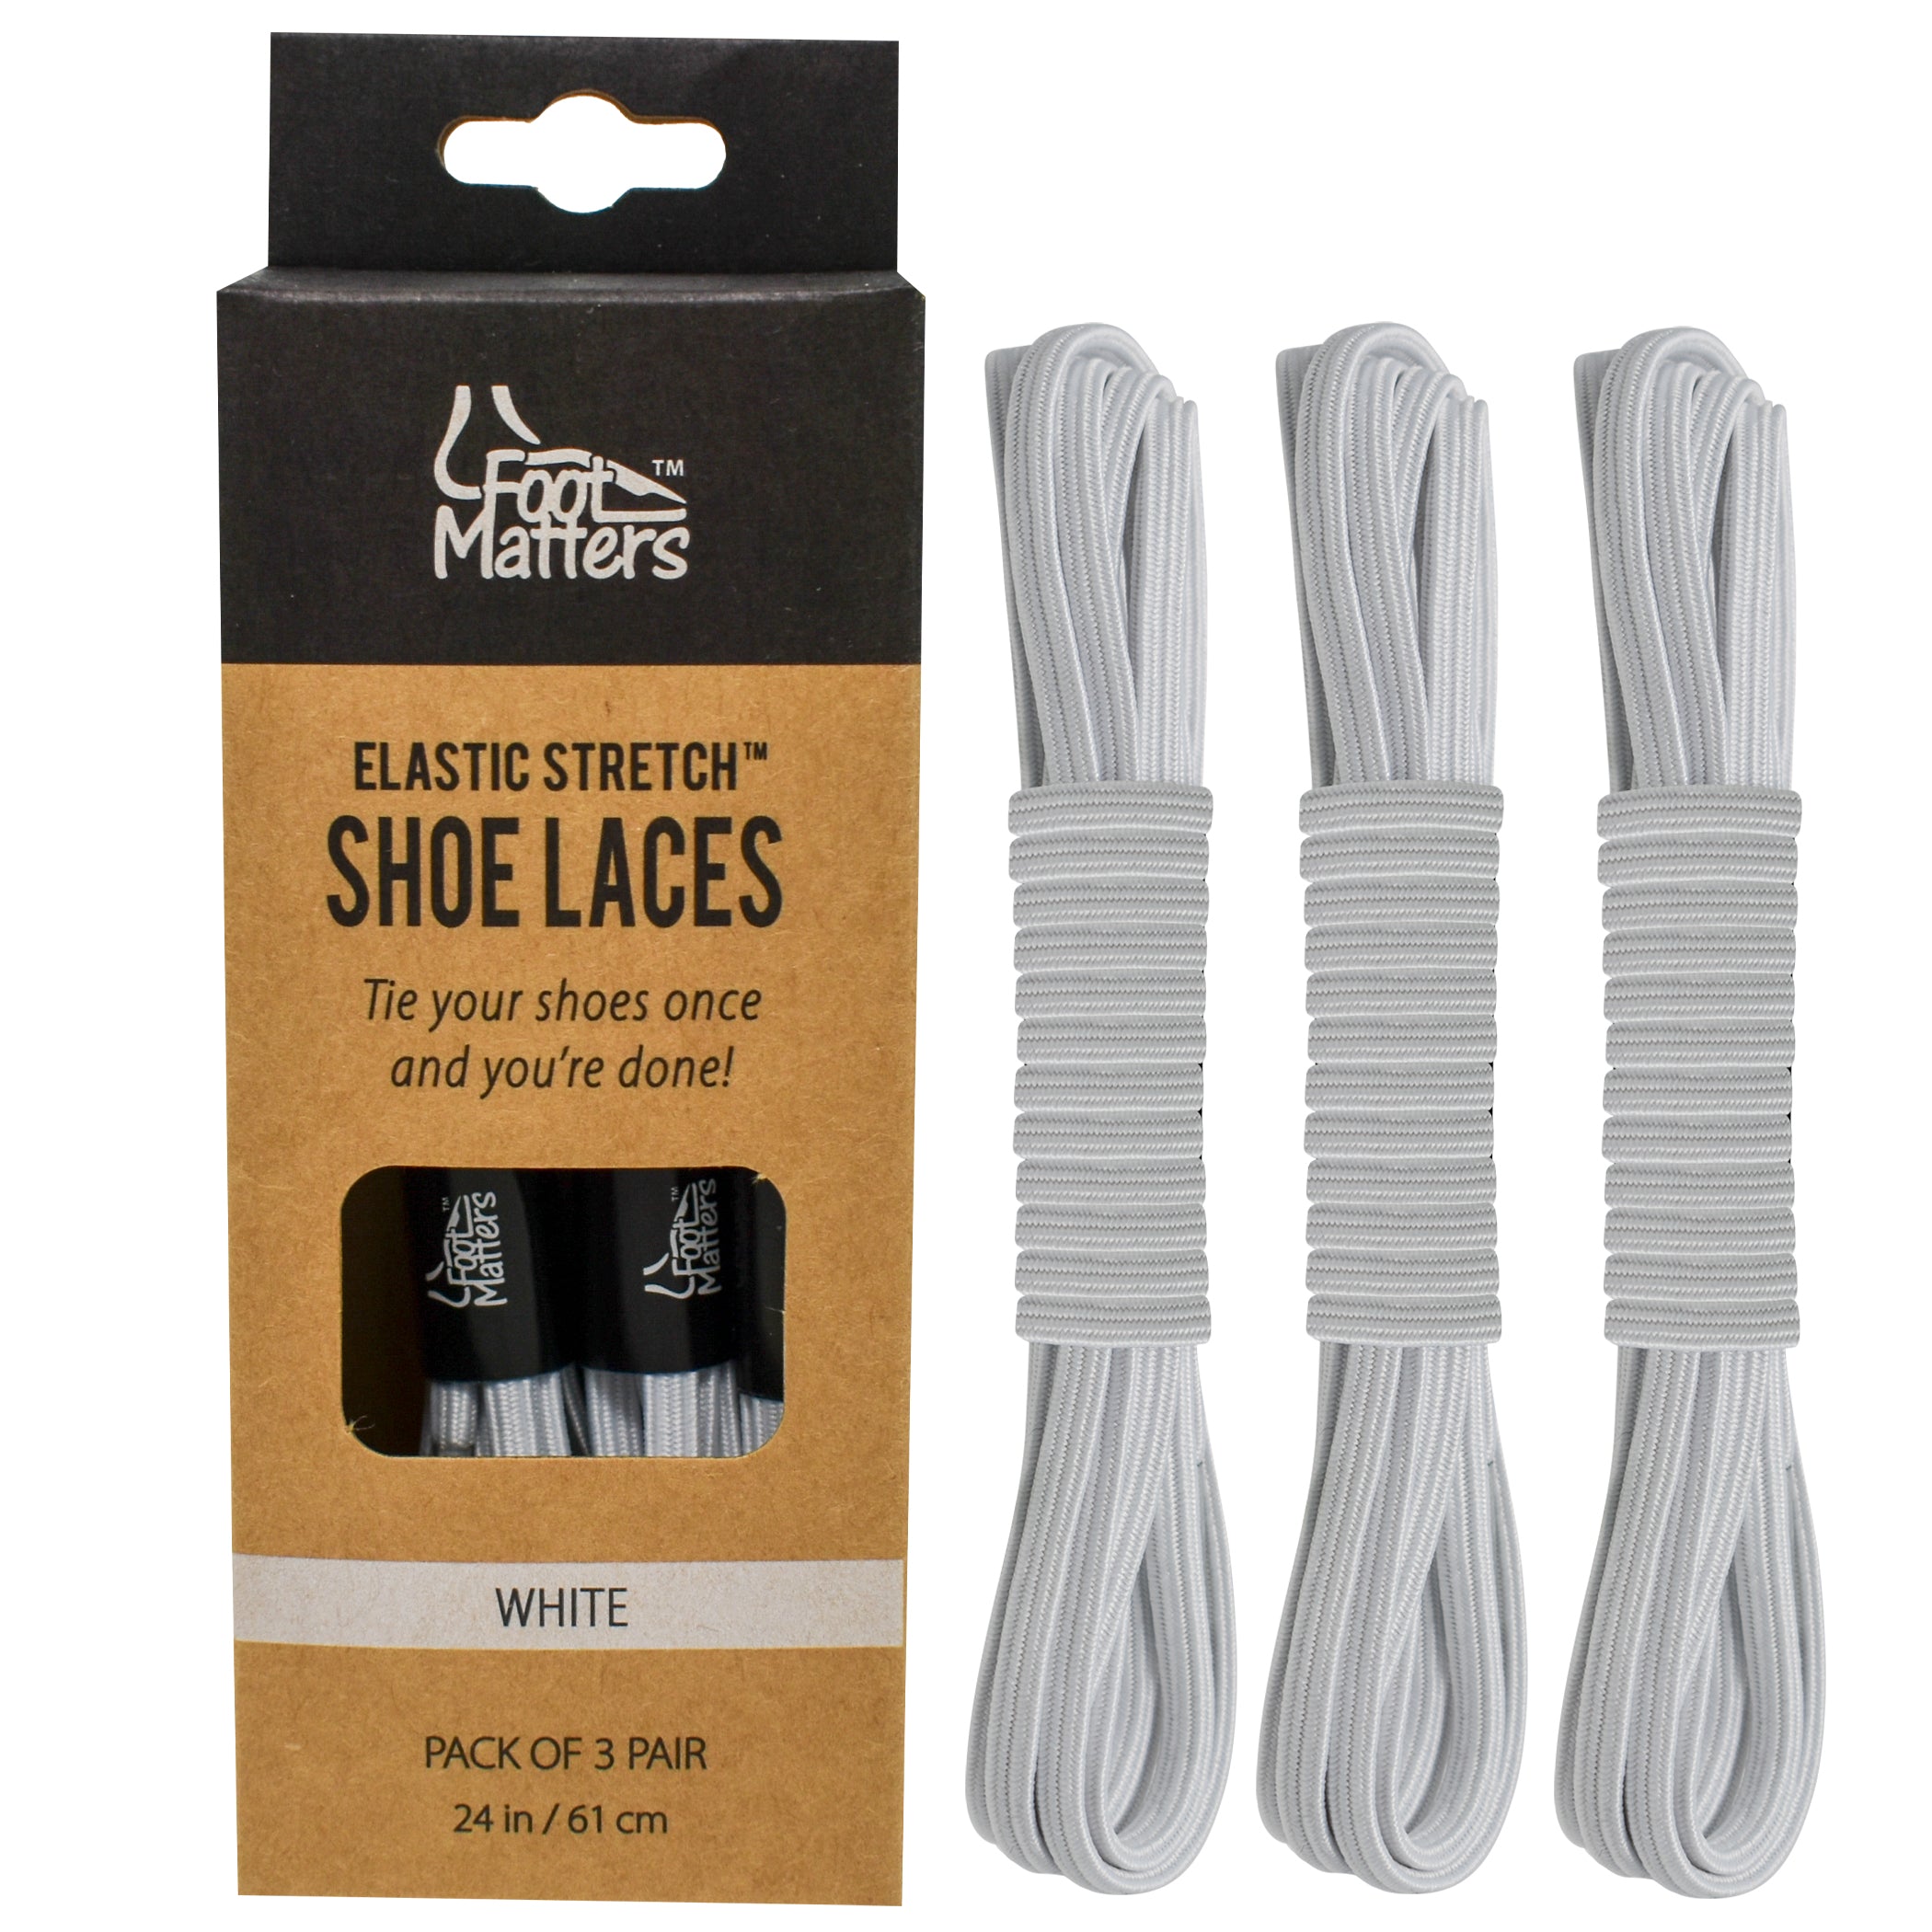 Are Elastic Laces Any Good? Stretchy Laces [Explained]